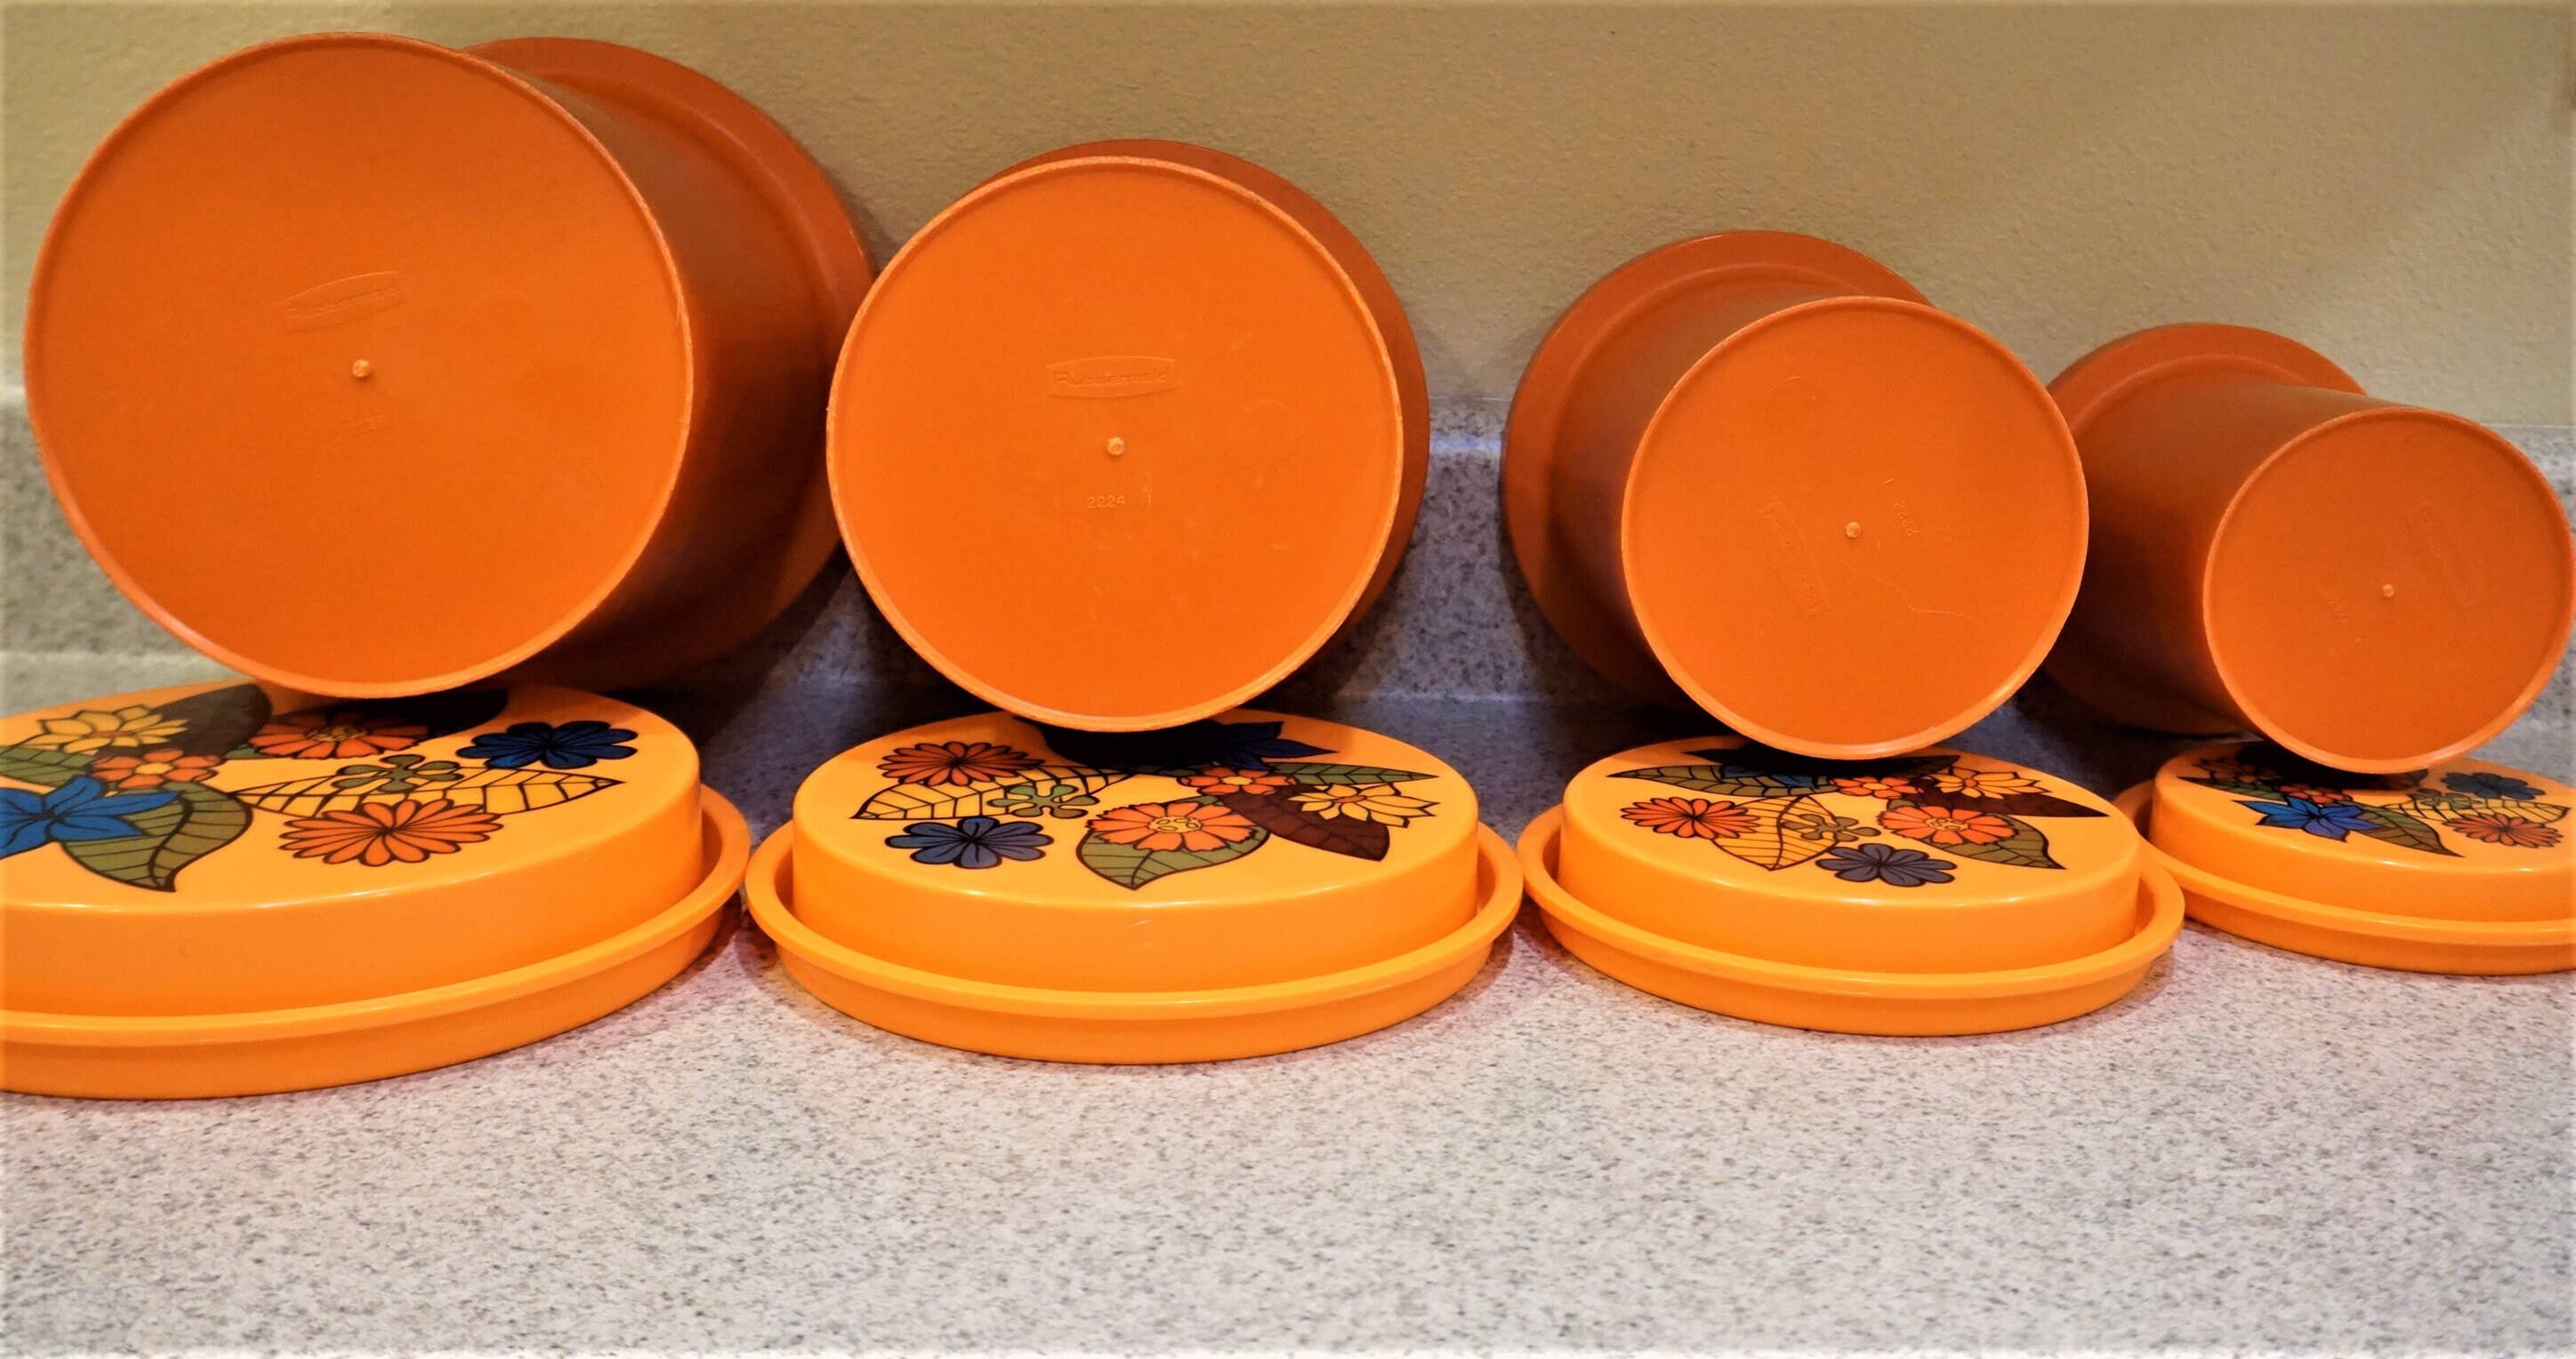 Rubbermaid Orange Kitchen Canisters